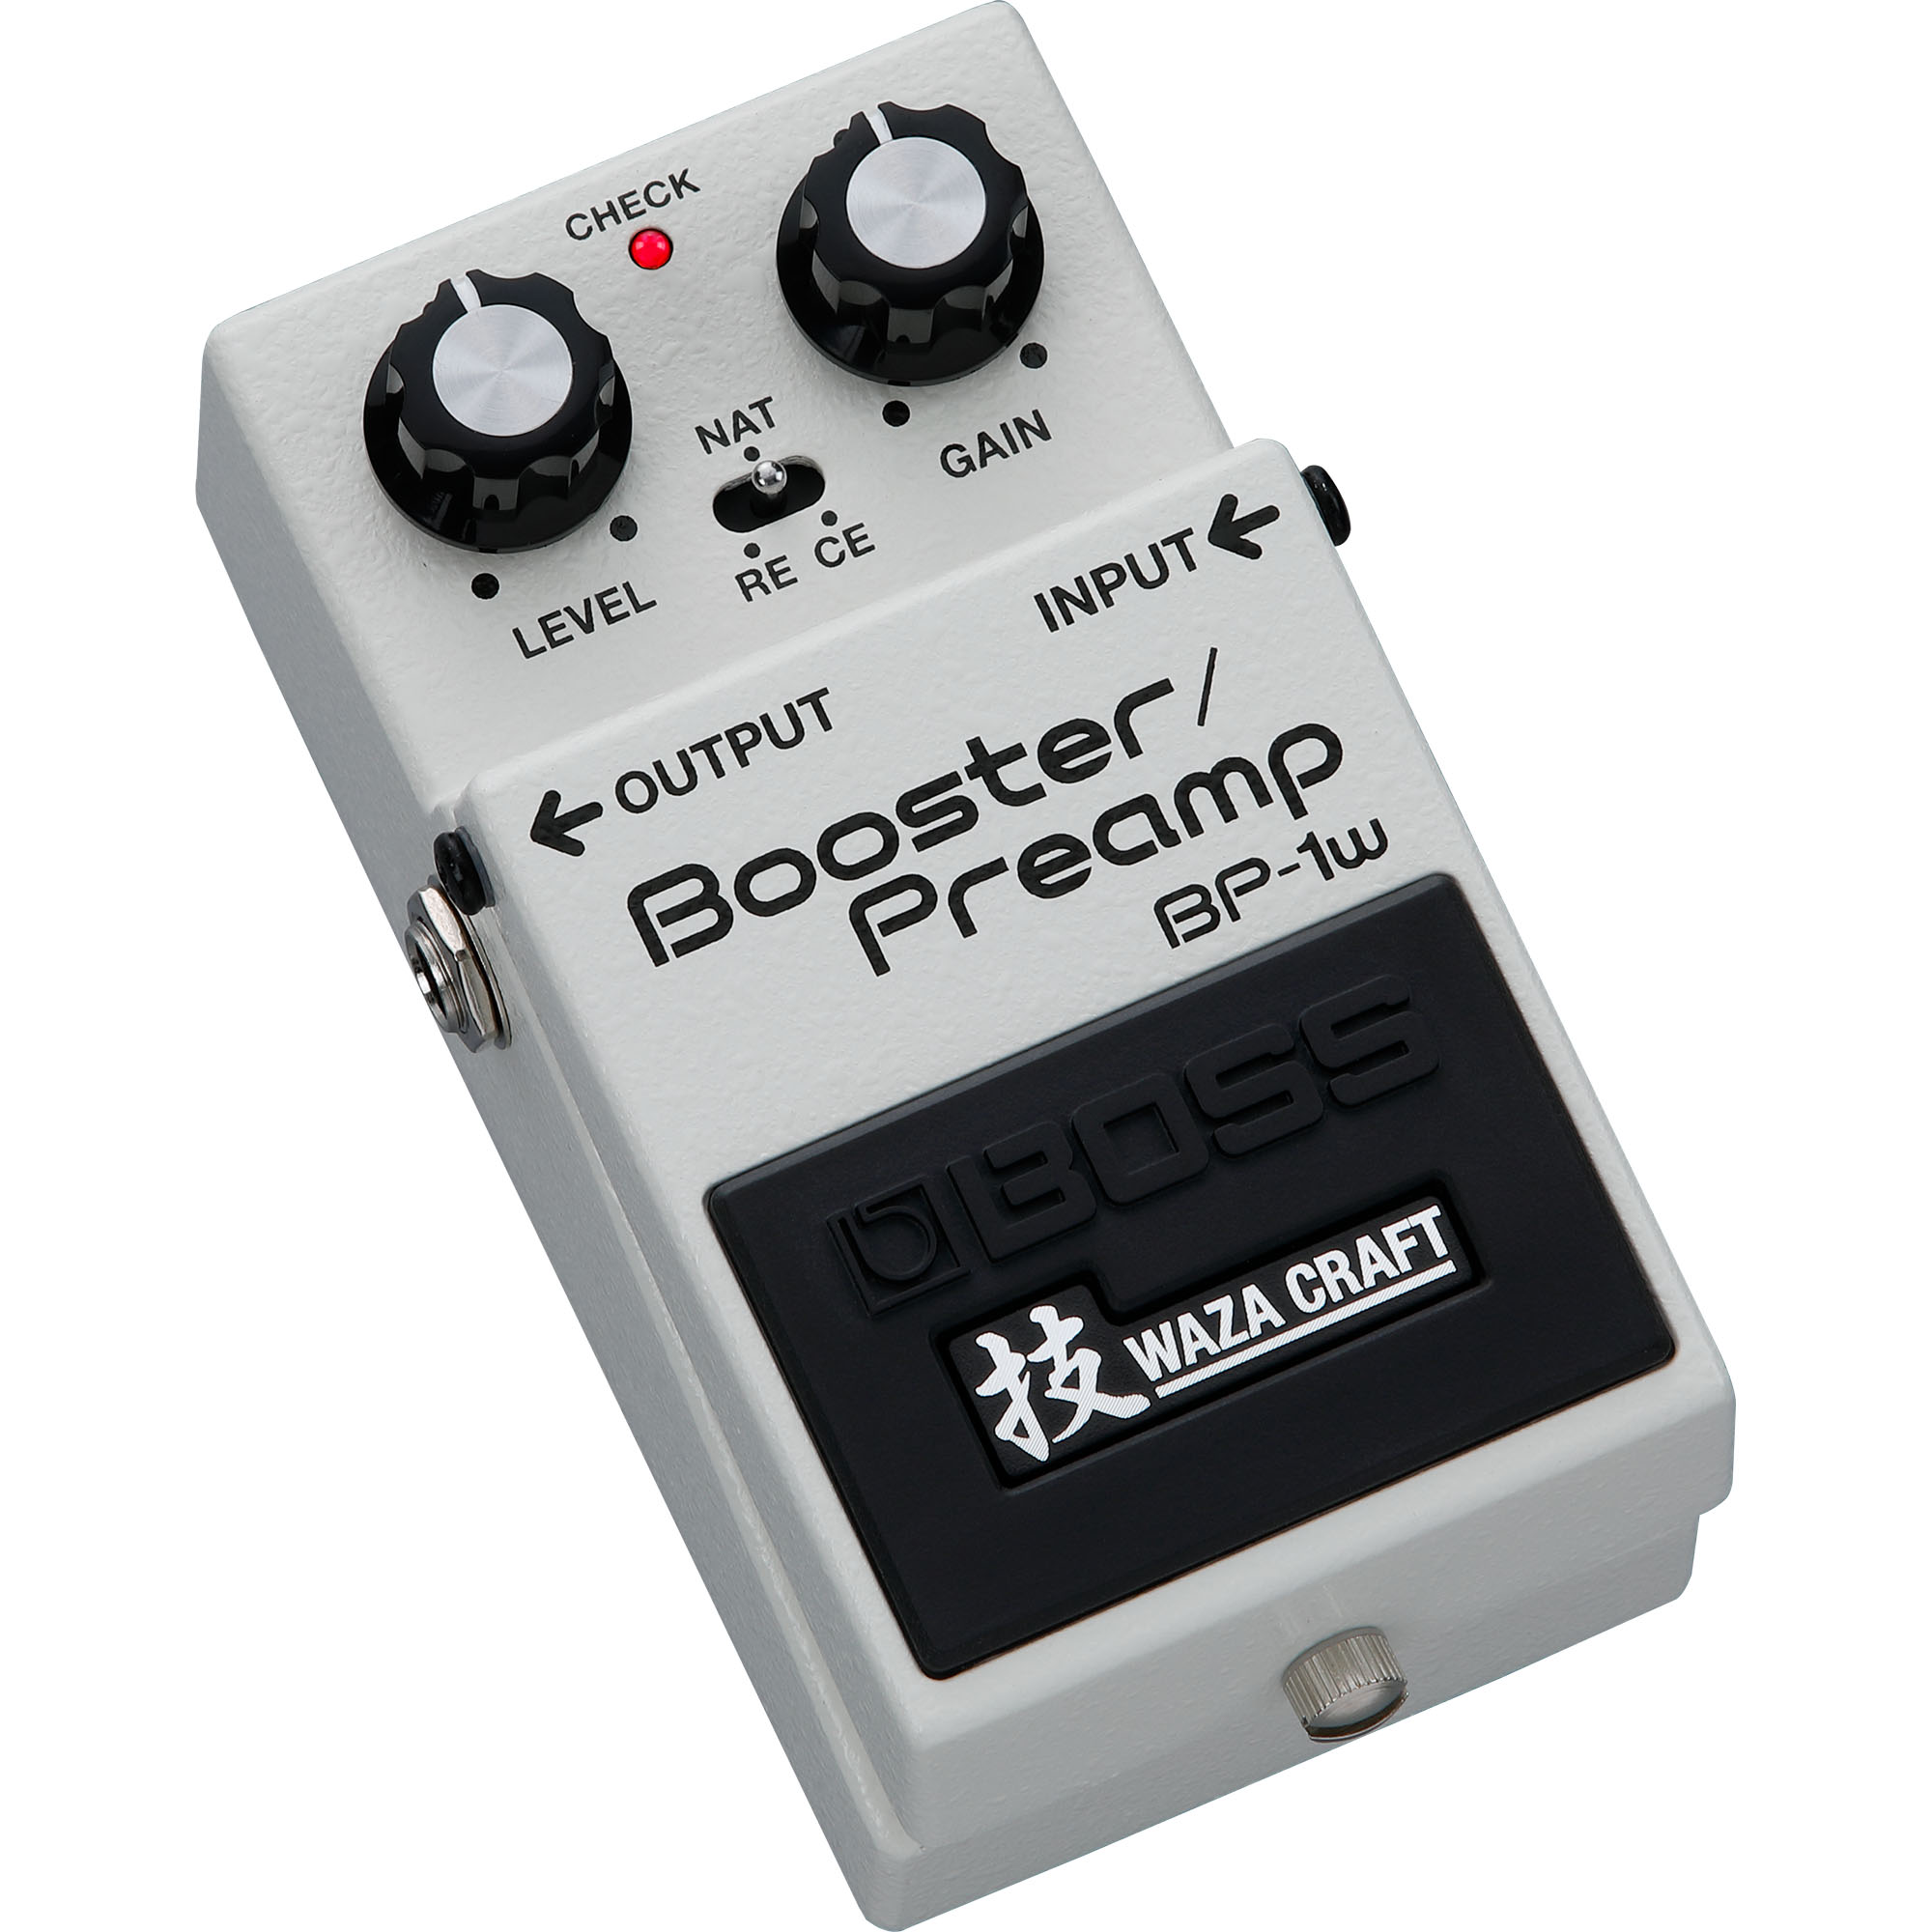 Boss Bp-1w Booster/preamp - Volume/Booster/Expression Effektpedal - Variation 3